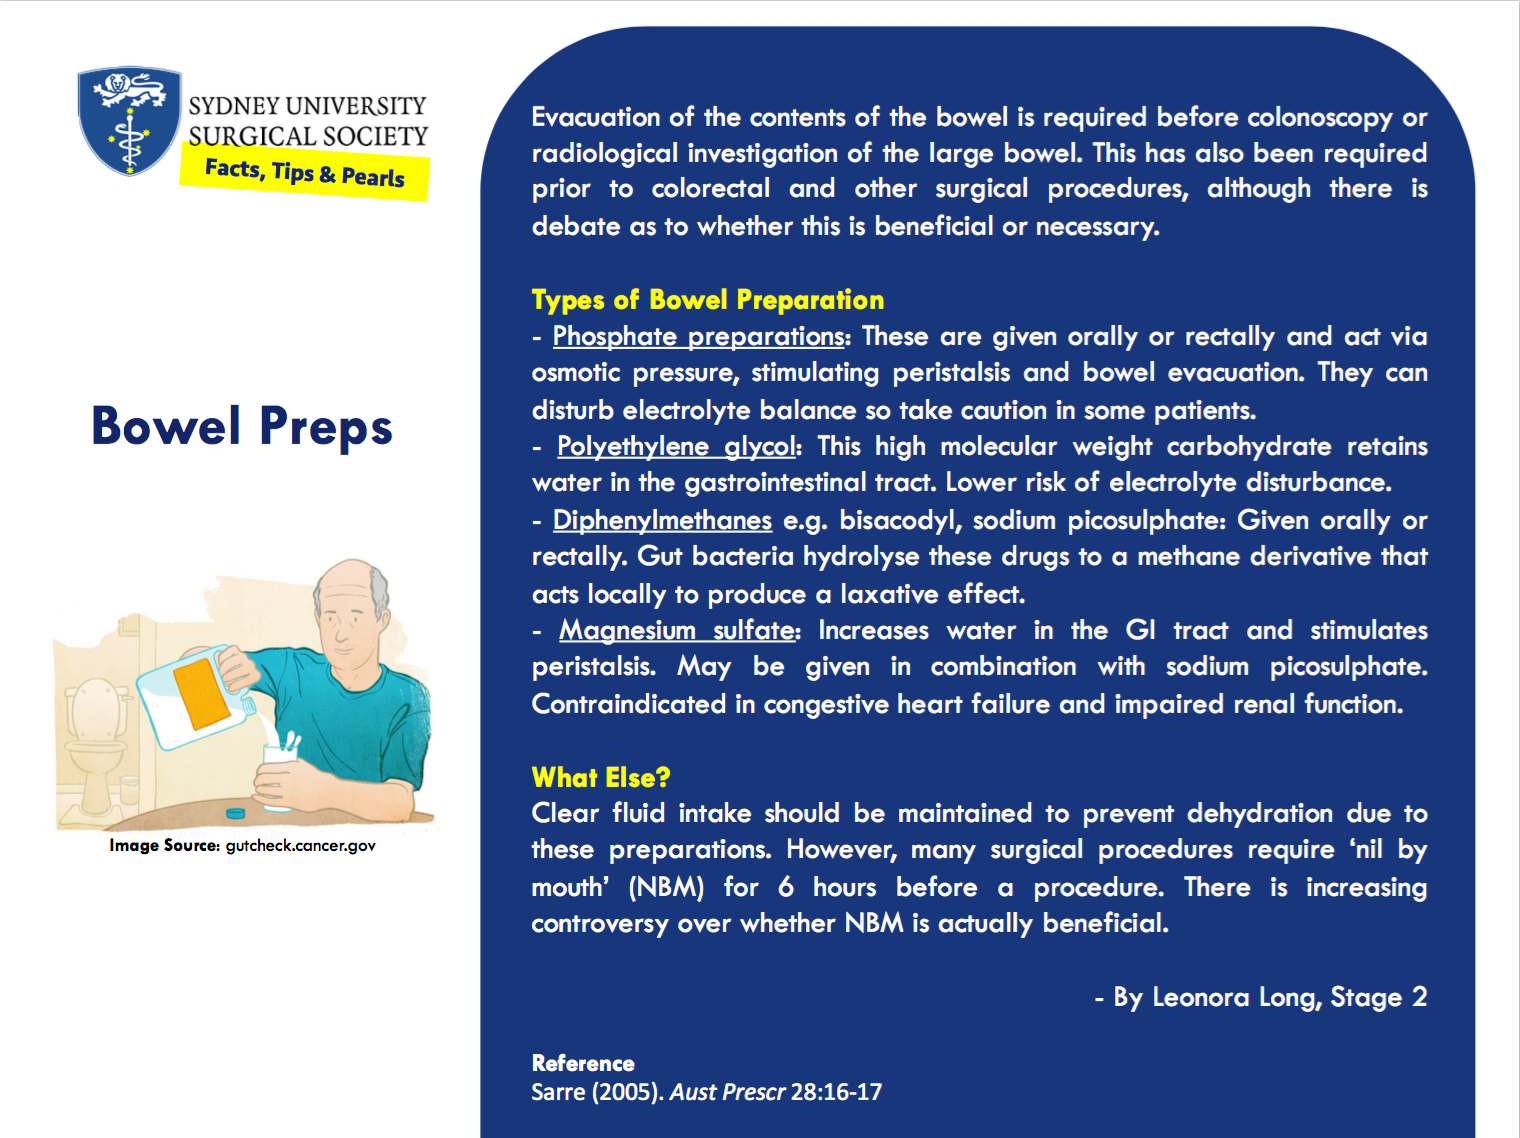 Text summarising the types of bowel preparations used in endoscopic and some surgical procedures